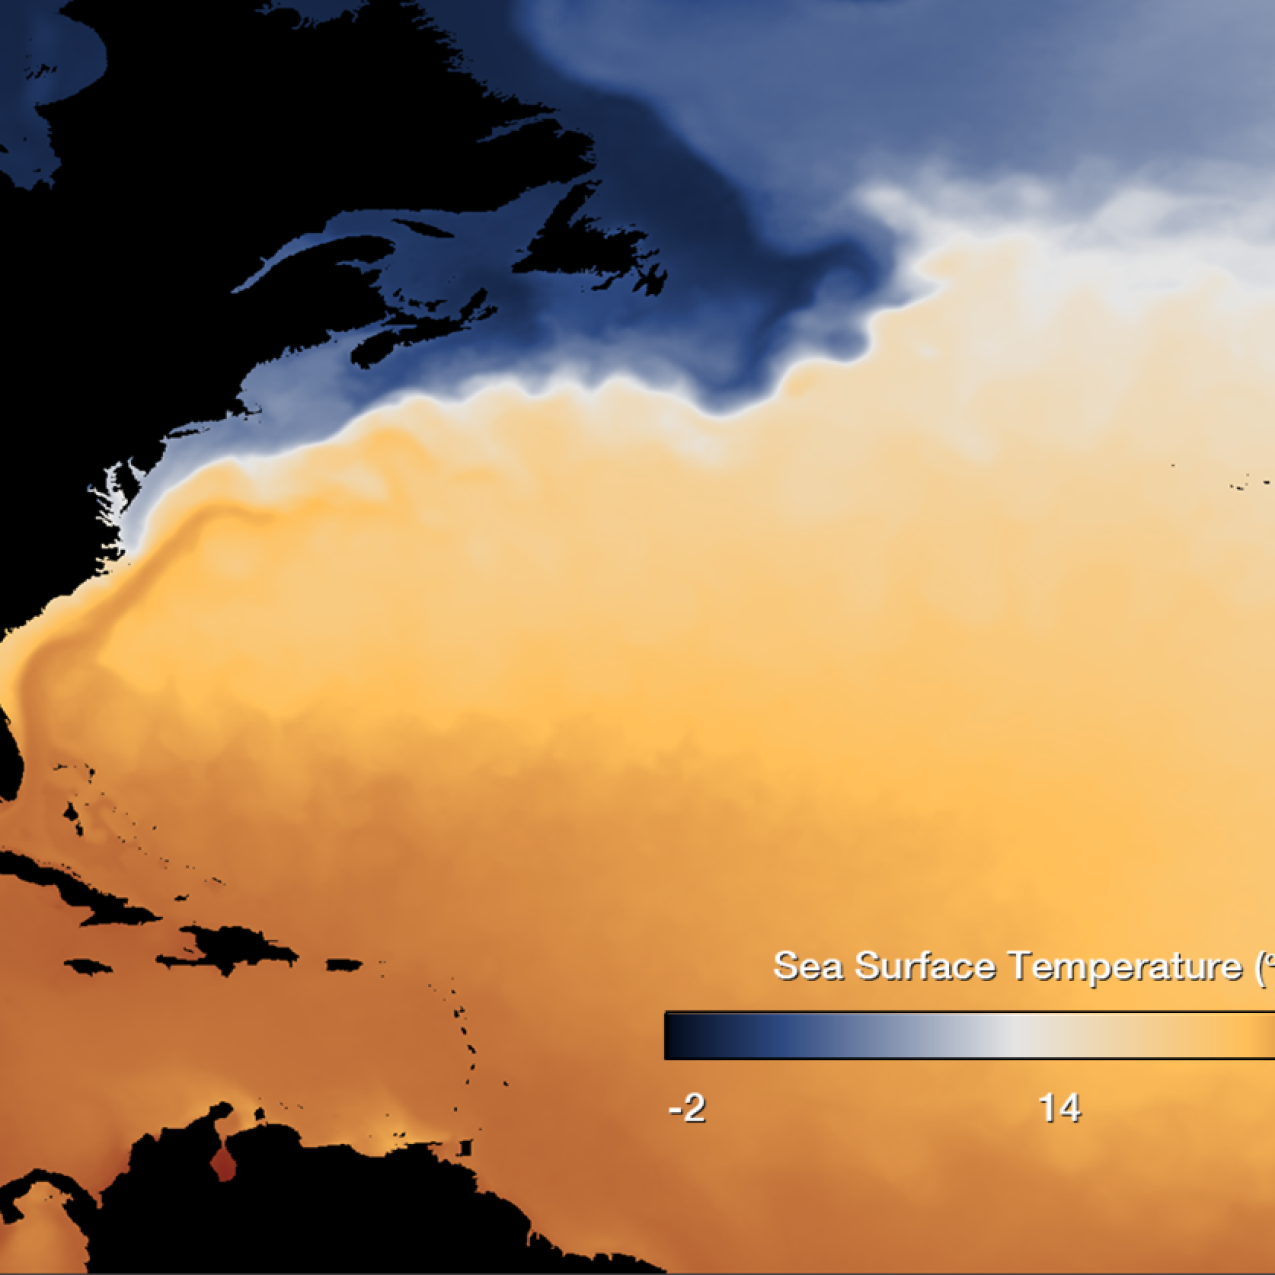 A map showing sea surface temperature in the North Atlantic Ocean. Warmer and cooler waters are shown in contrasting colors and all water south of the Gulf Stream current is much warmer than the water north of it.